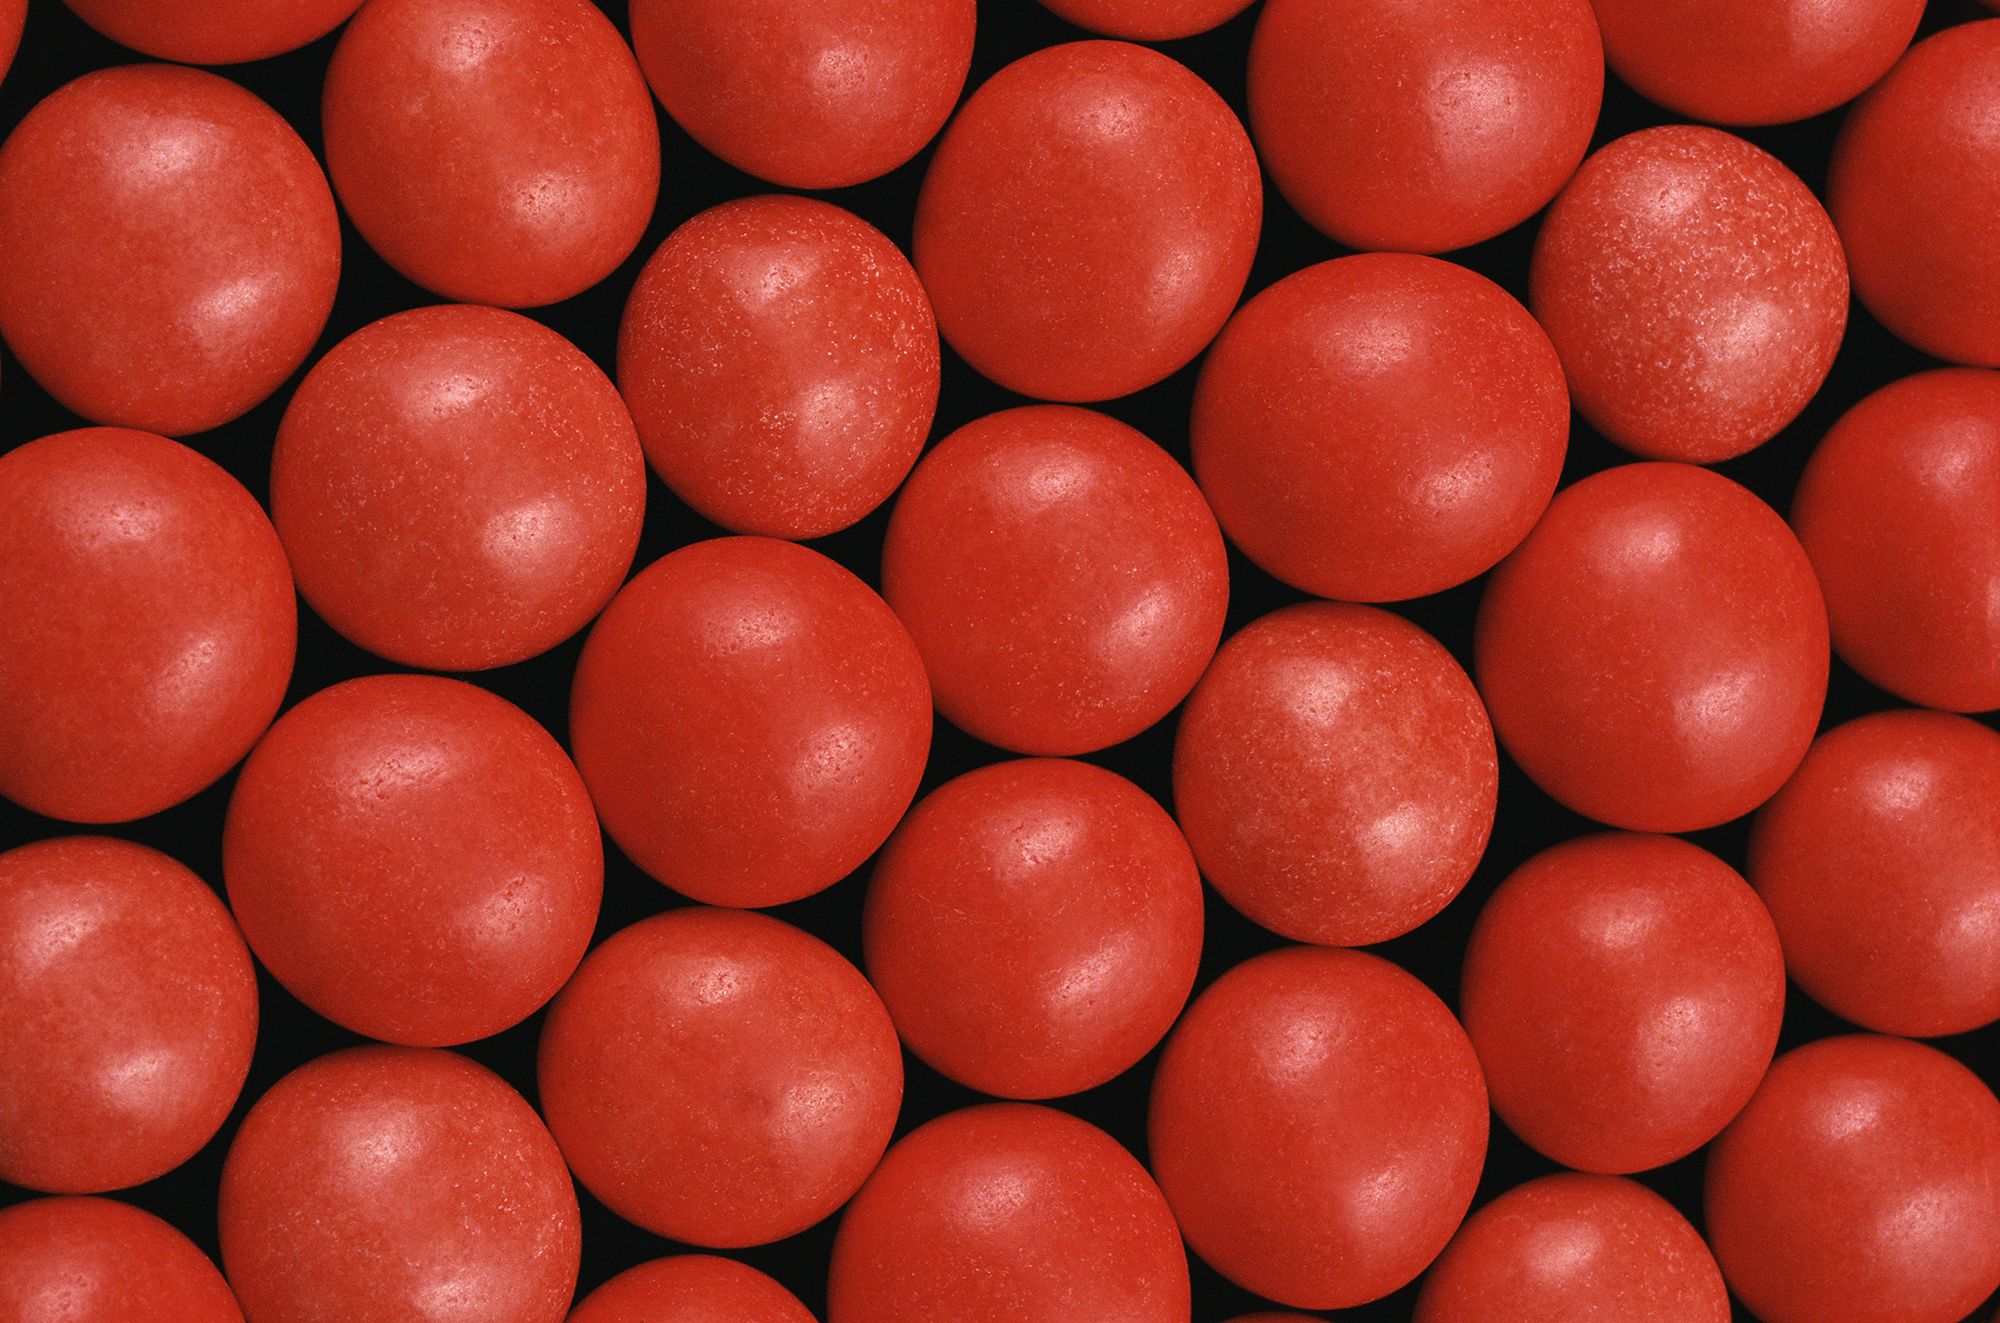 Red Dye in Foods: Uses and Health Risks